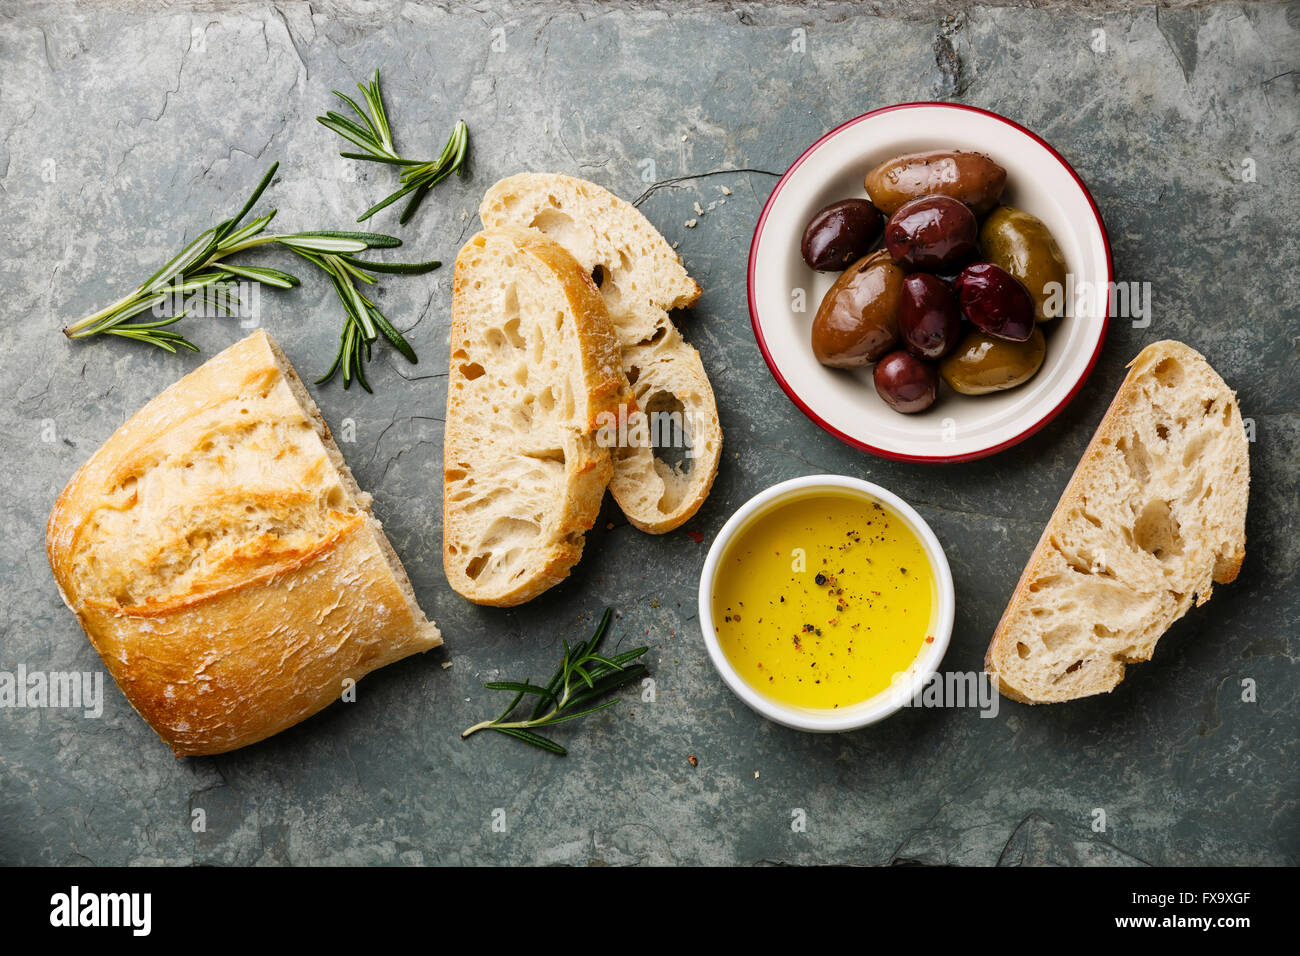 Sliced fresh bread Ciabatta with olive oil, olives and rosemary on gray stone slate background Stock Photo